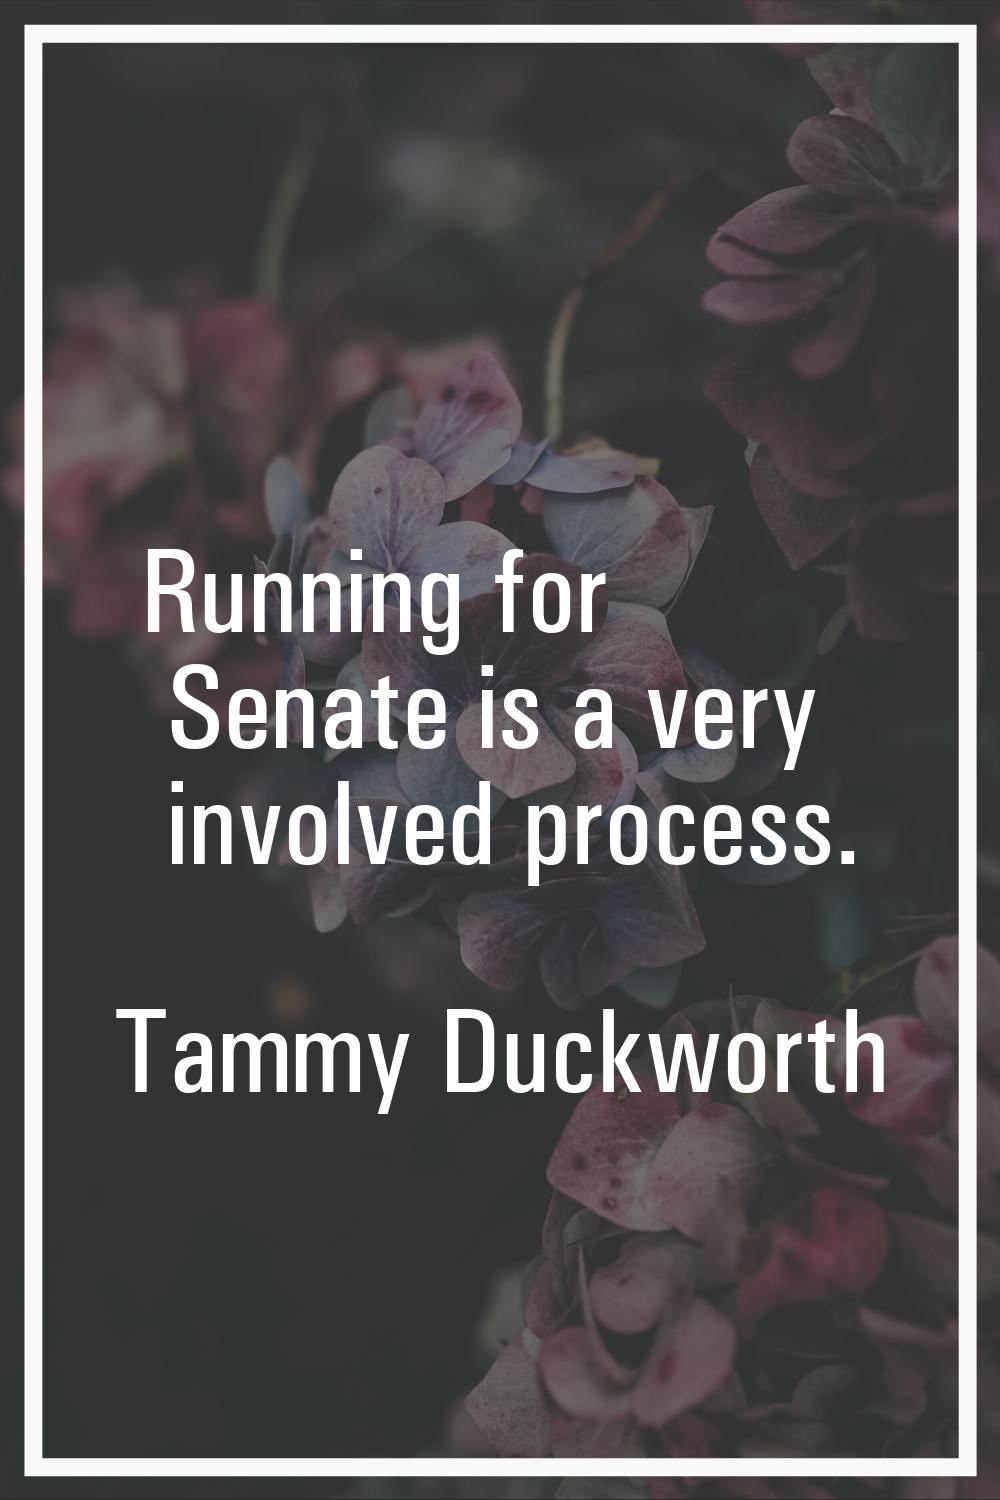 Running for Senate is a very involved process.